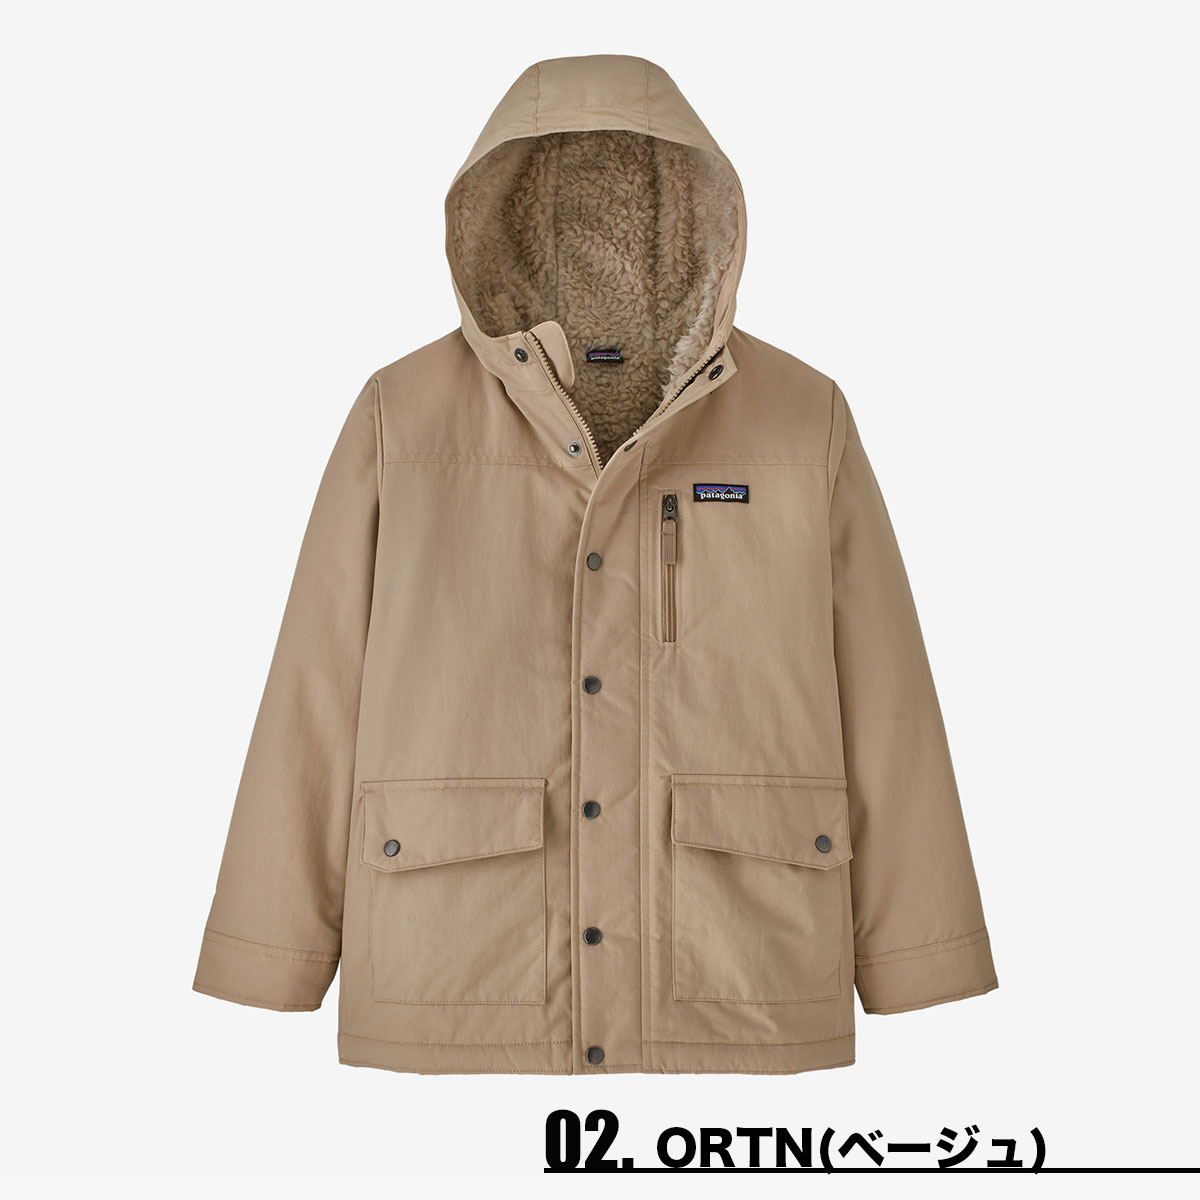 20%OFF ウィンターセール】 Patagonia パタゴニア キッズ